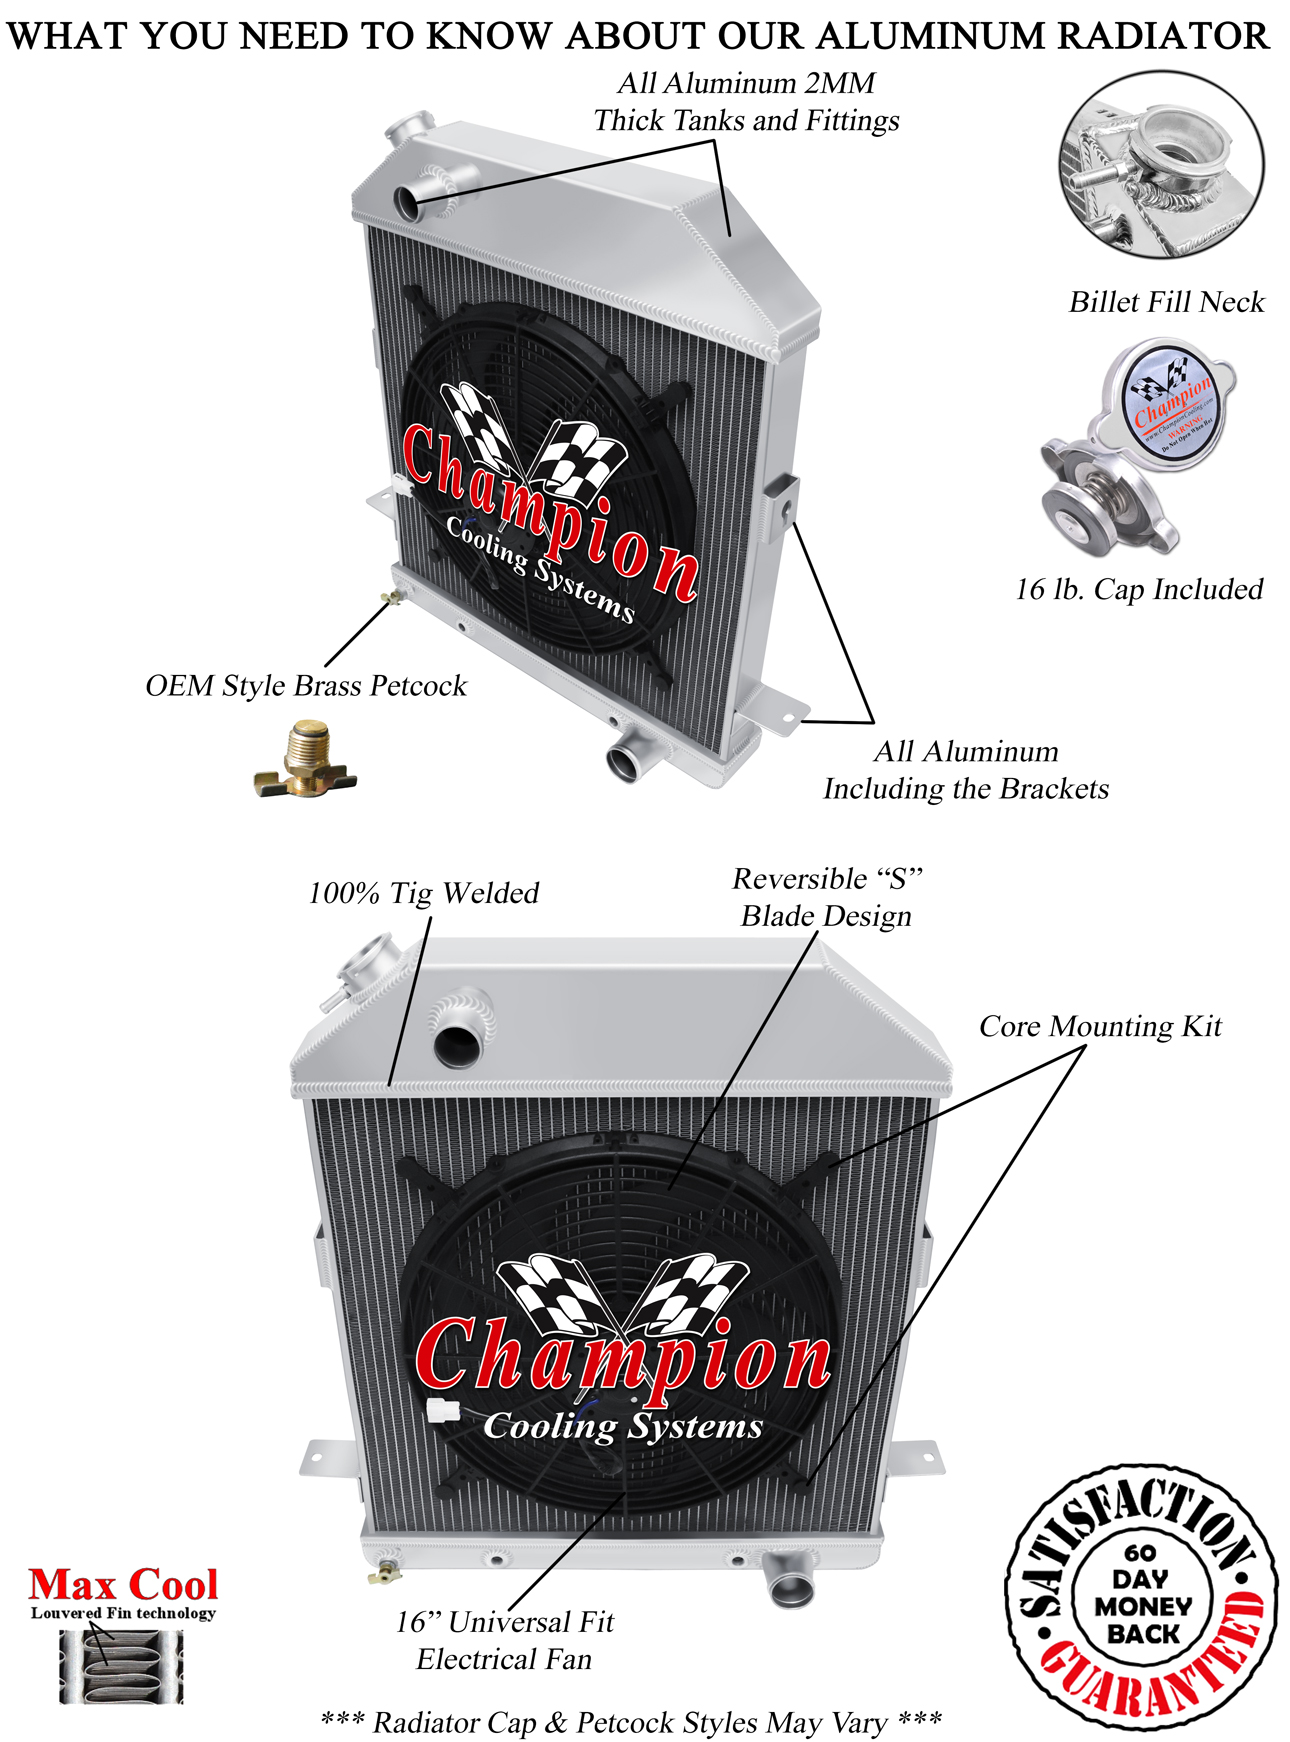 https://www.championcooling.com/photos/Photos%20White/With%20Fans/Combos/4001ch/16/4001ch_1f_d_w.jpg